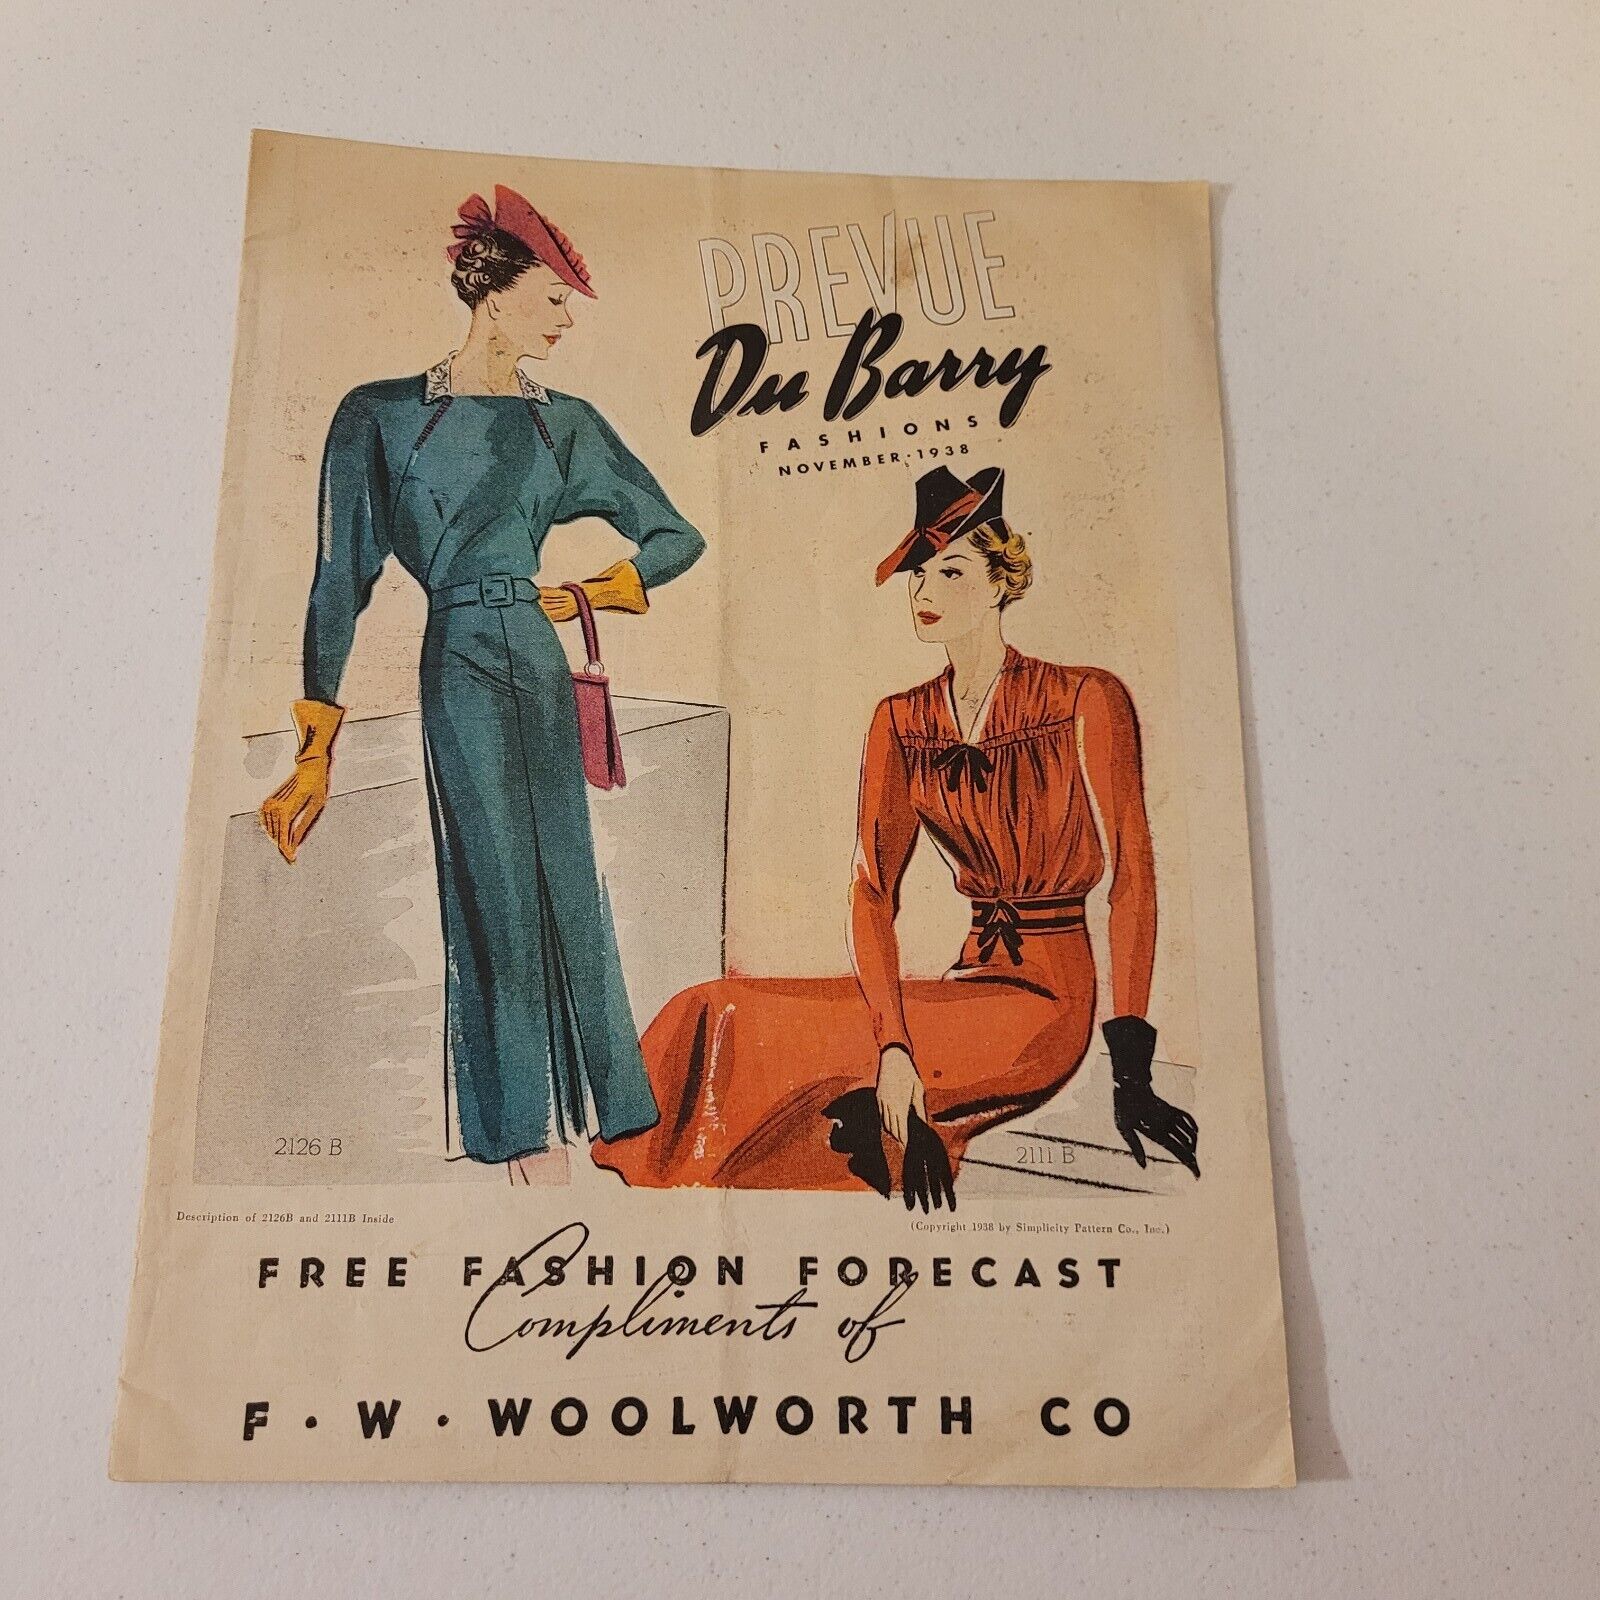 Du Barry Patterns November 1938 Clothing Sewing Patterns Catalog F.W. Woolworth